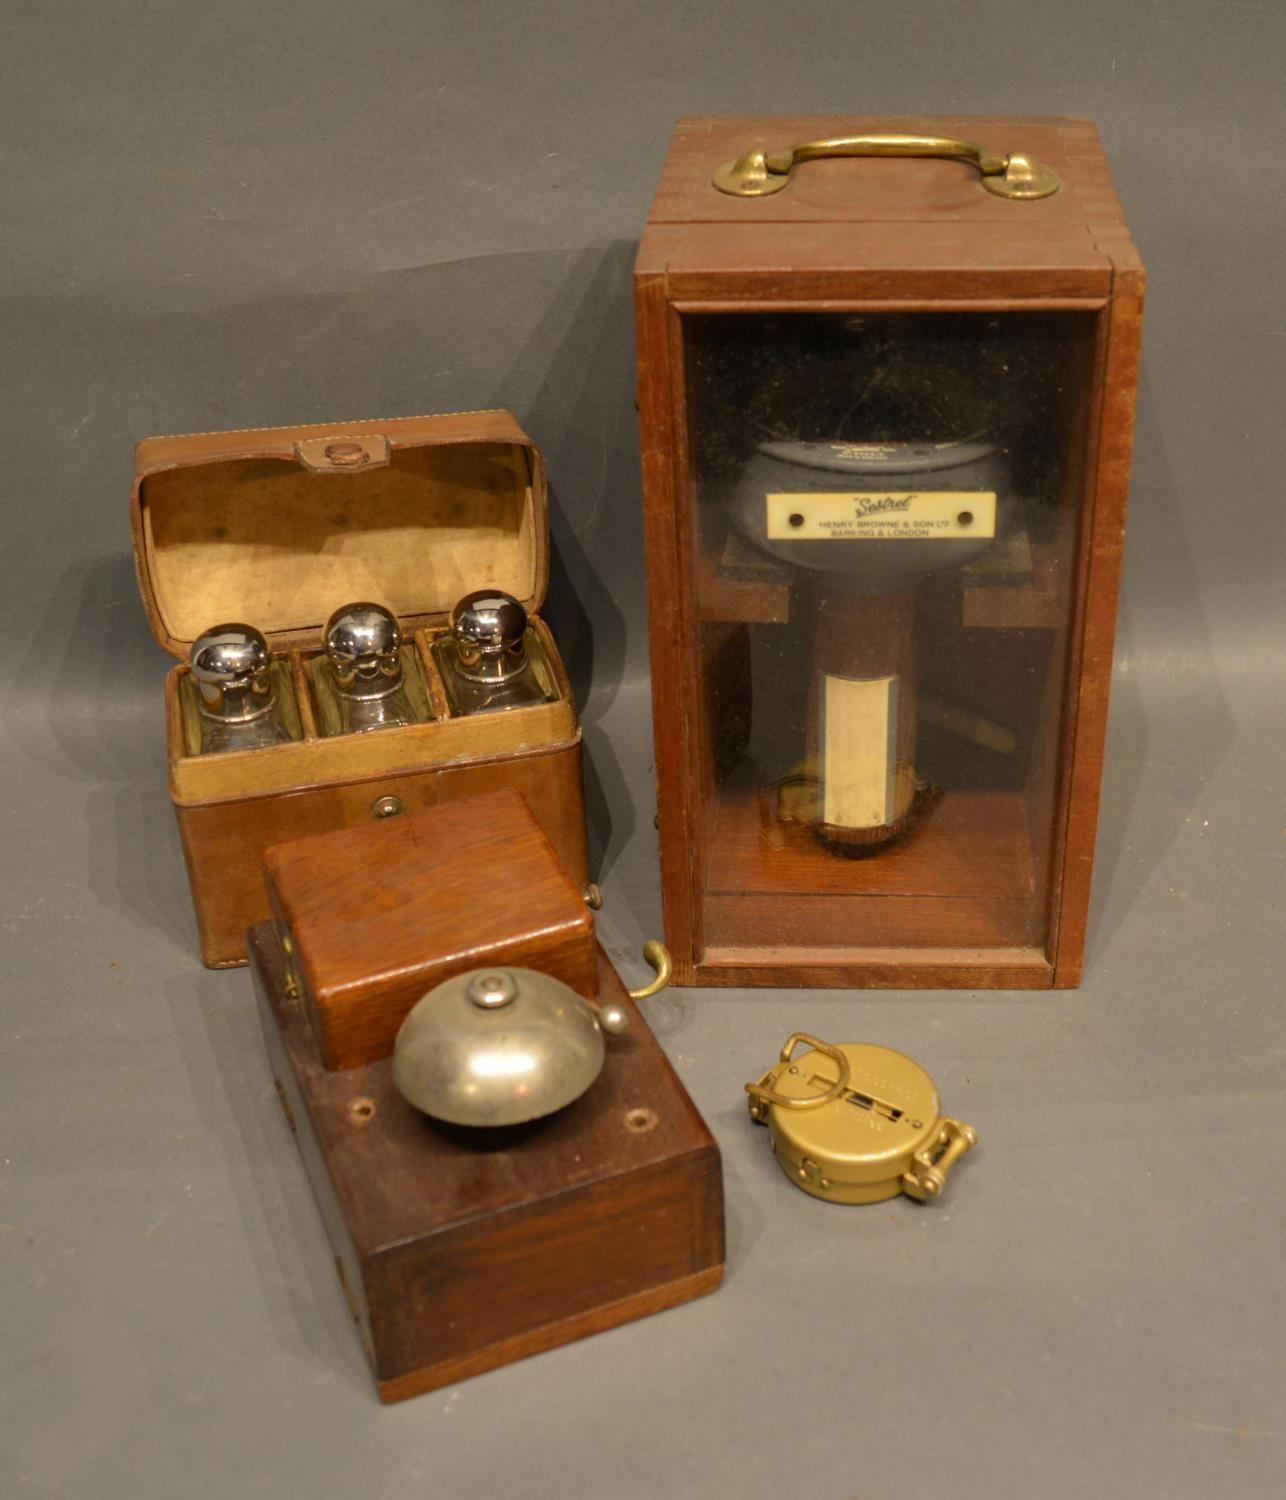 A Sestral Hand Held Compass By Henry Browne & Sons, London, within original box, together with a